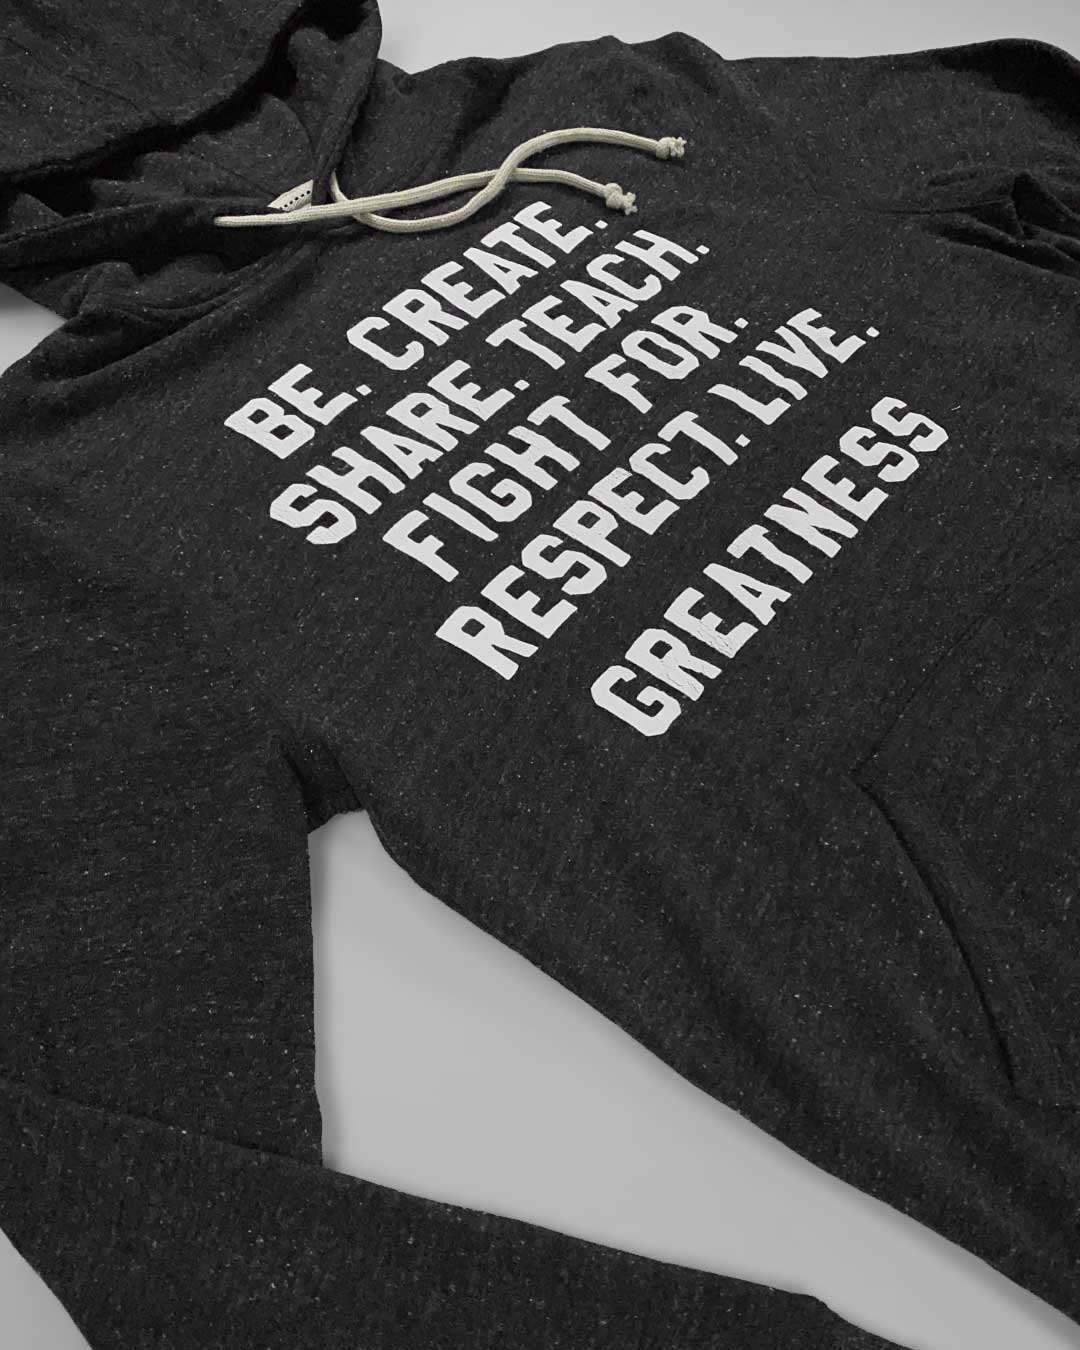 BHT - Culture of Greatness Pullover Hoody - Roots of Inc dba Roots of Fight